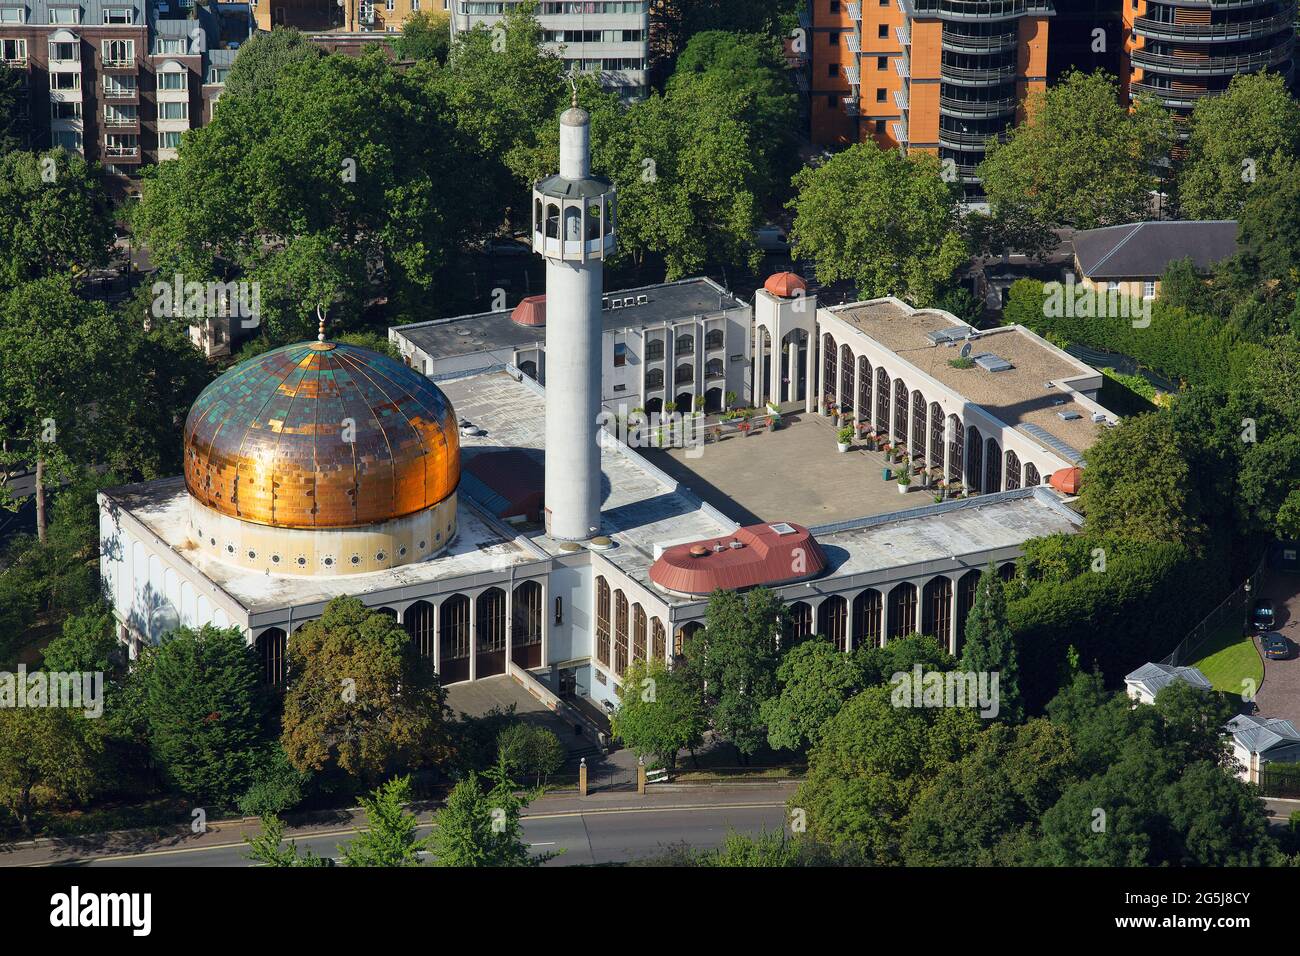 UK, London, Aerial view of London Central Mosque in Regents Park Stock Photo